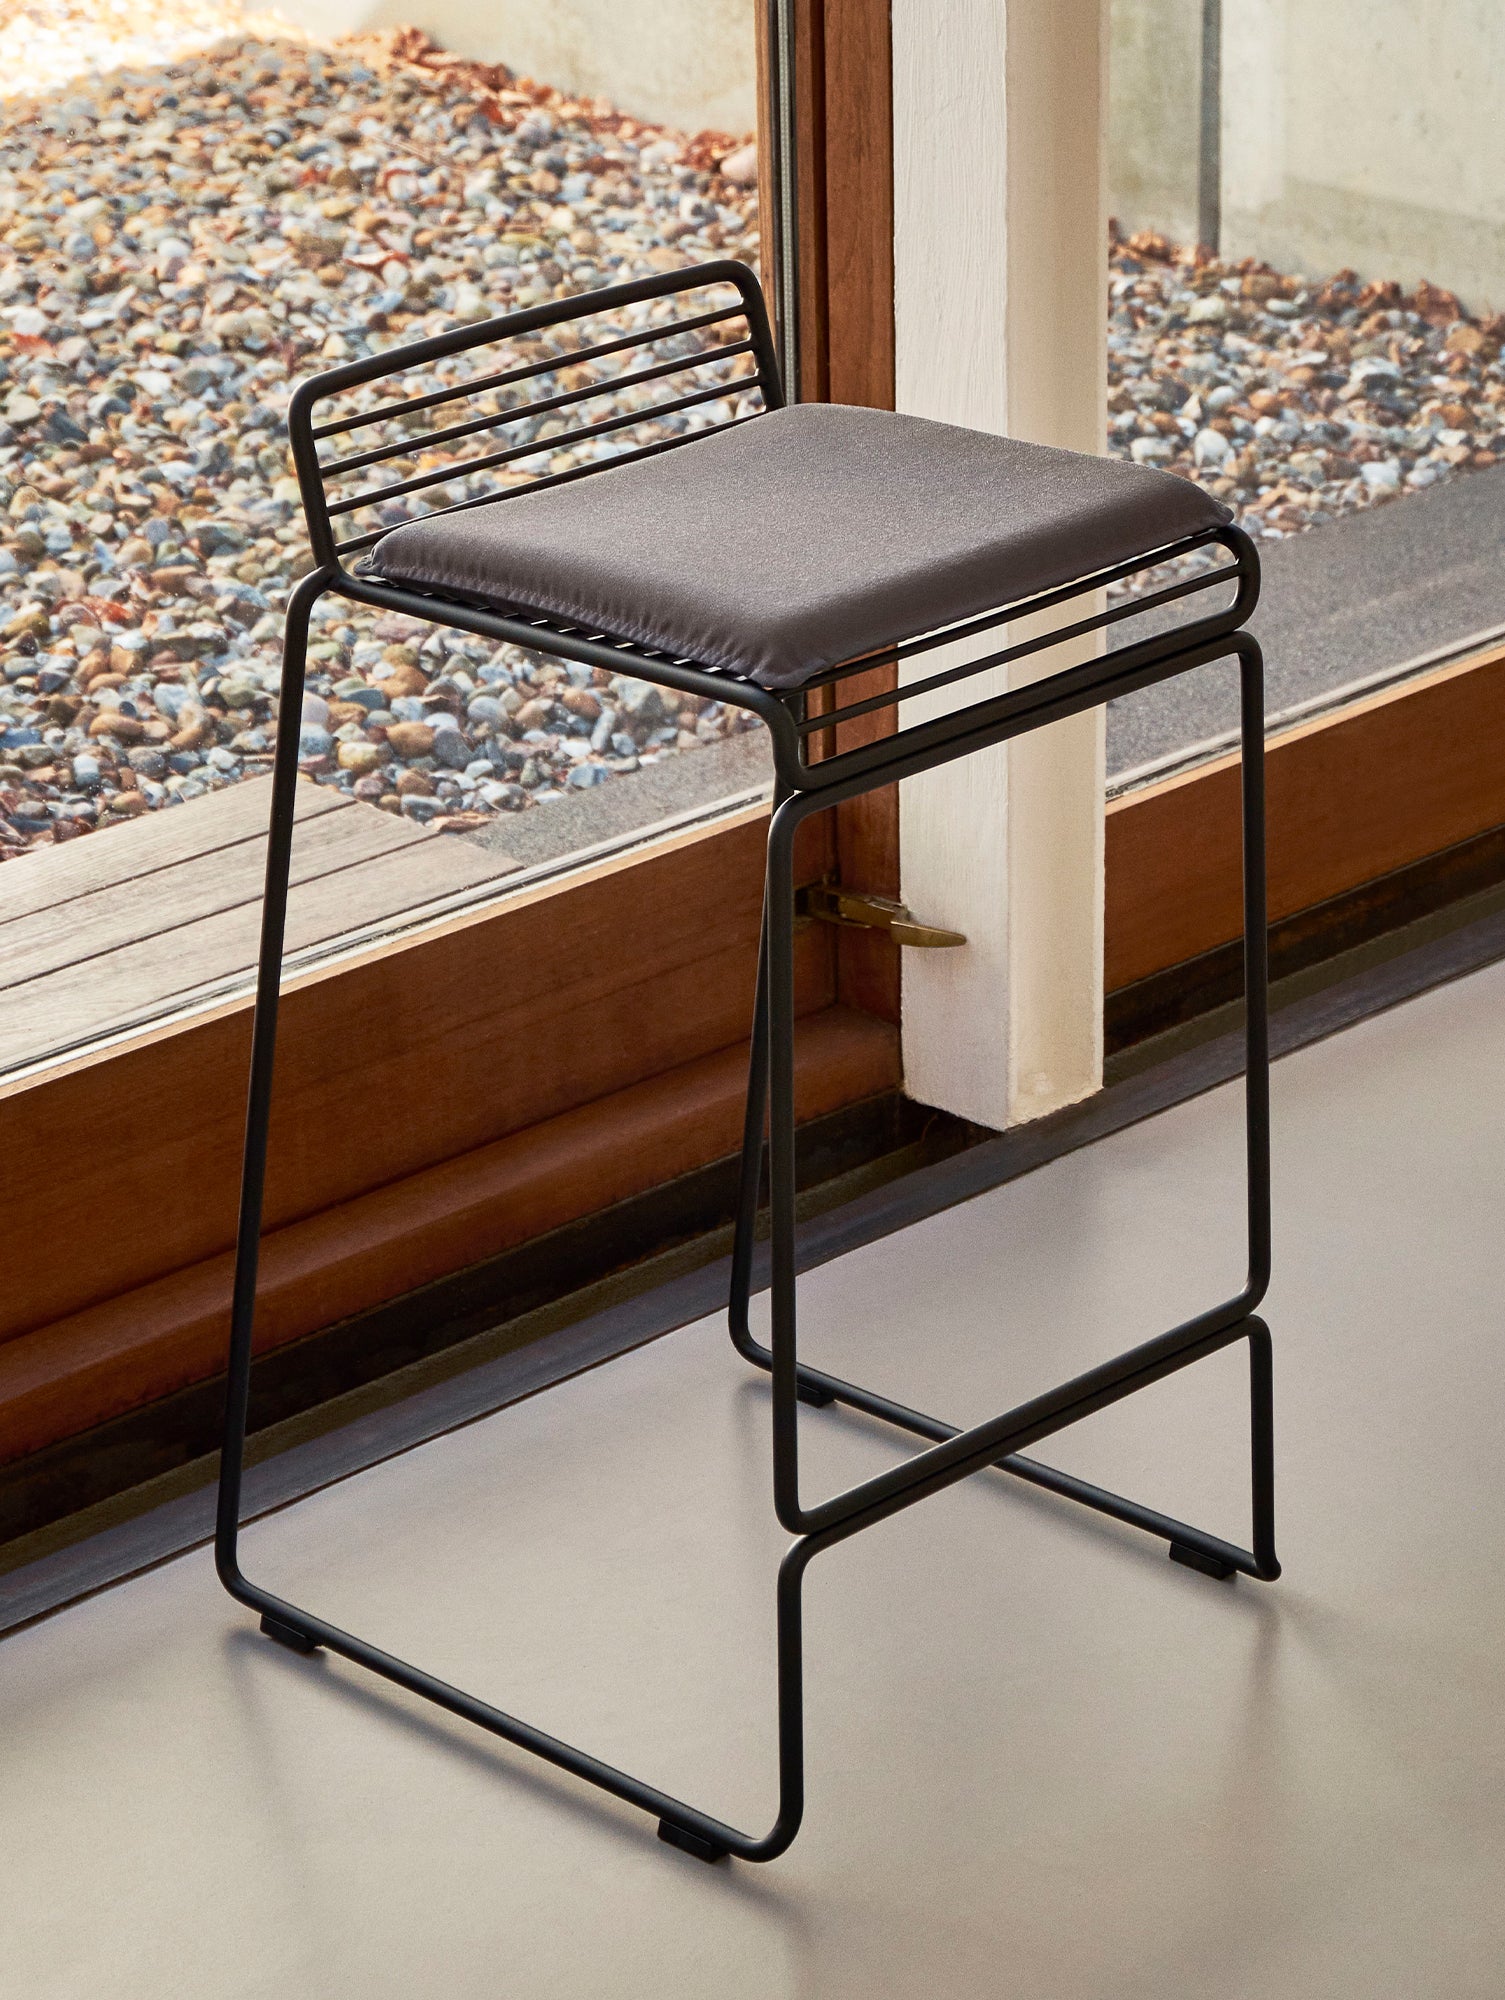 Hee Bar Stool Seat Cushion by HAY - Anthracite Olefin